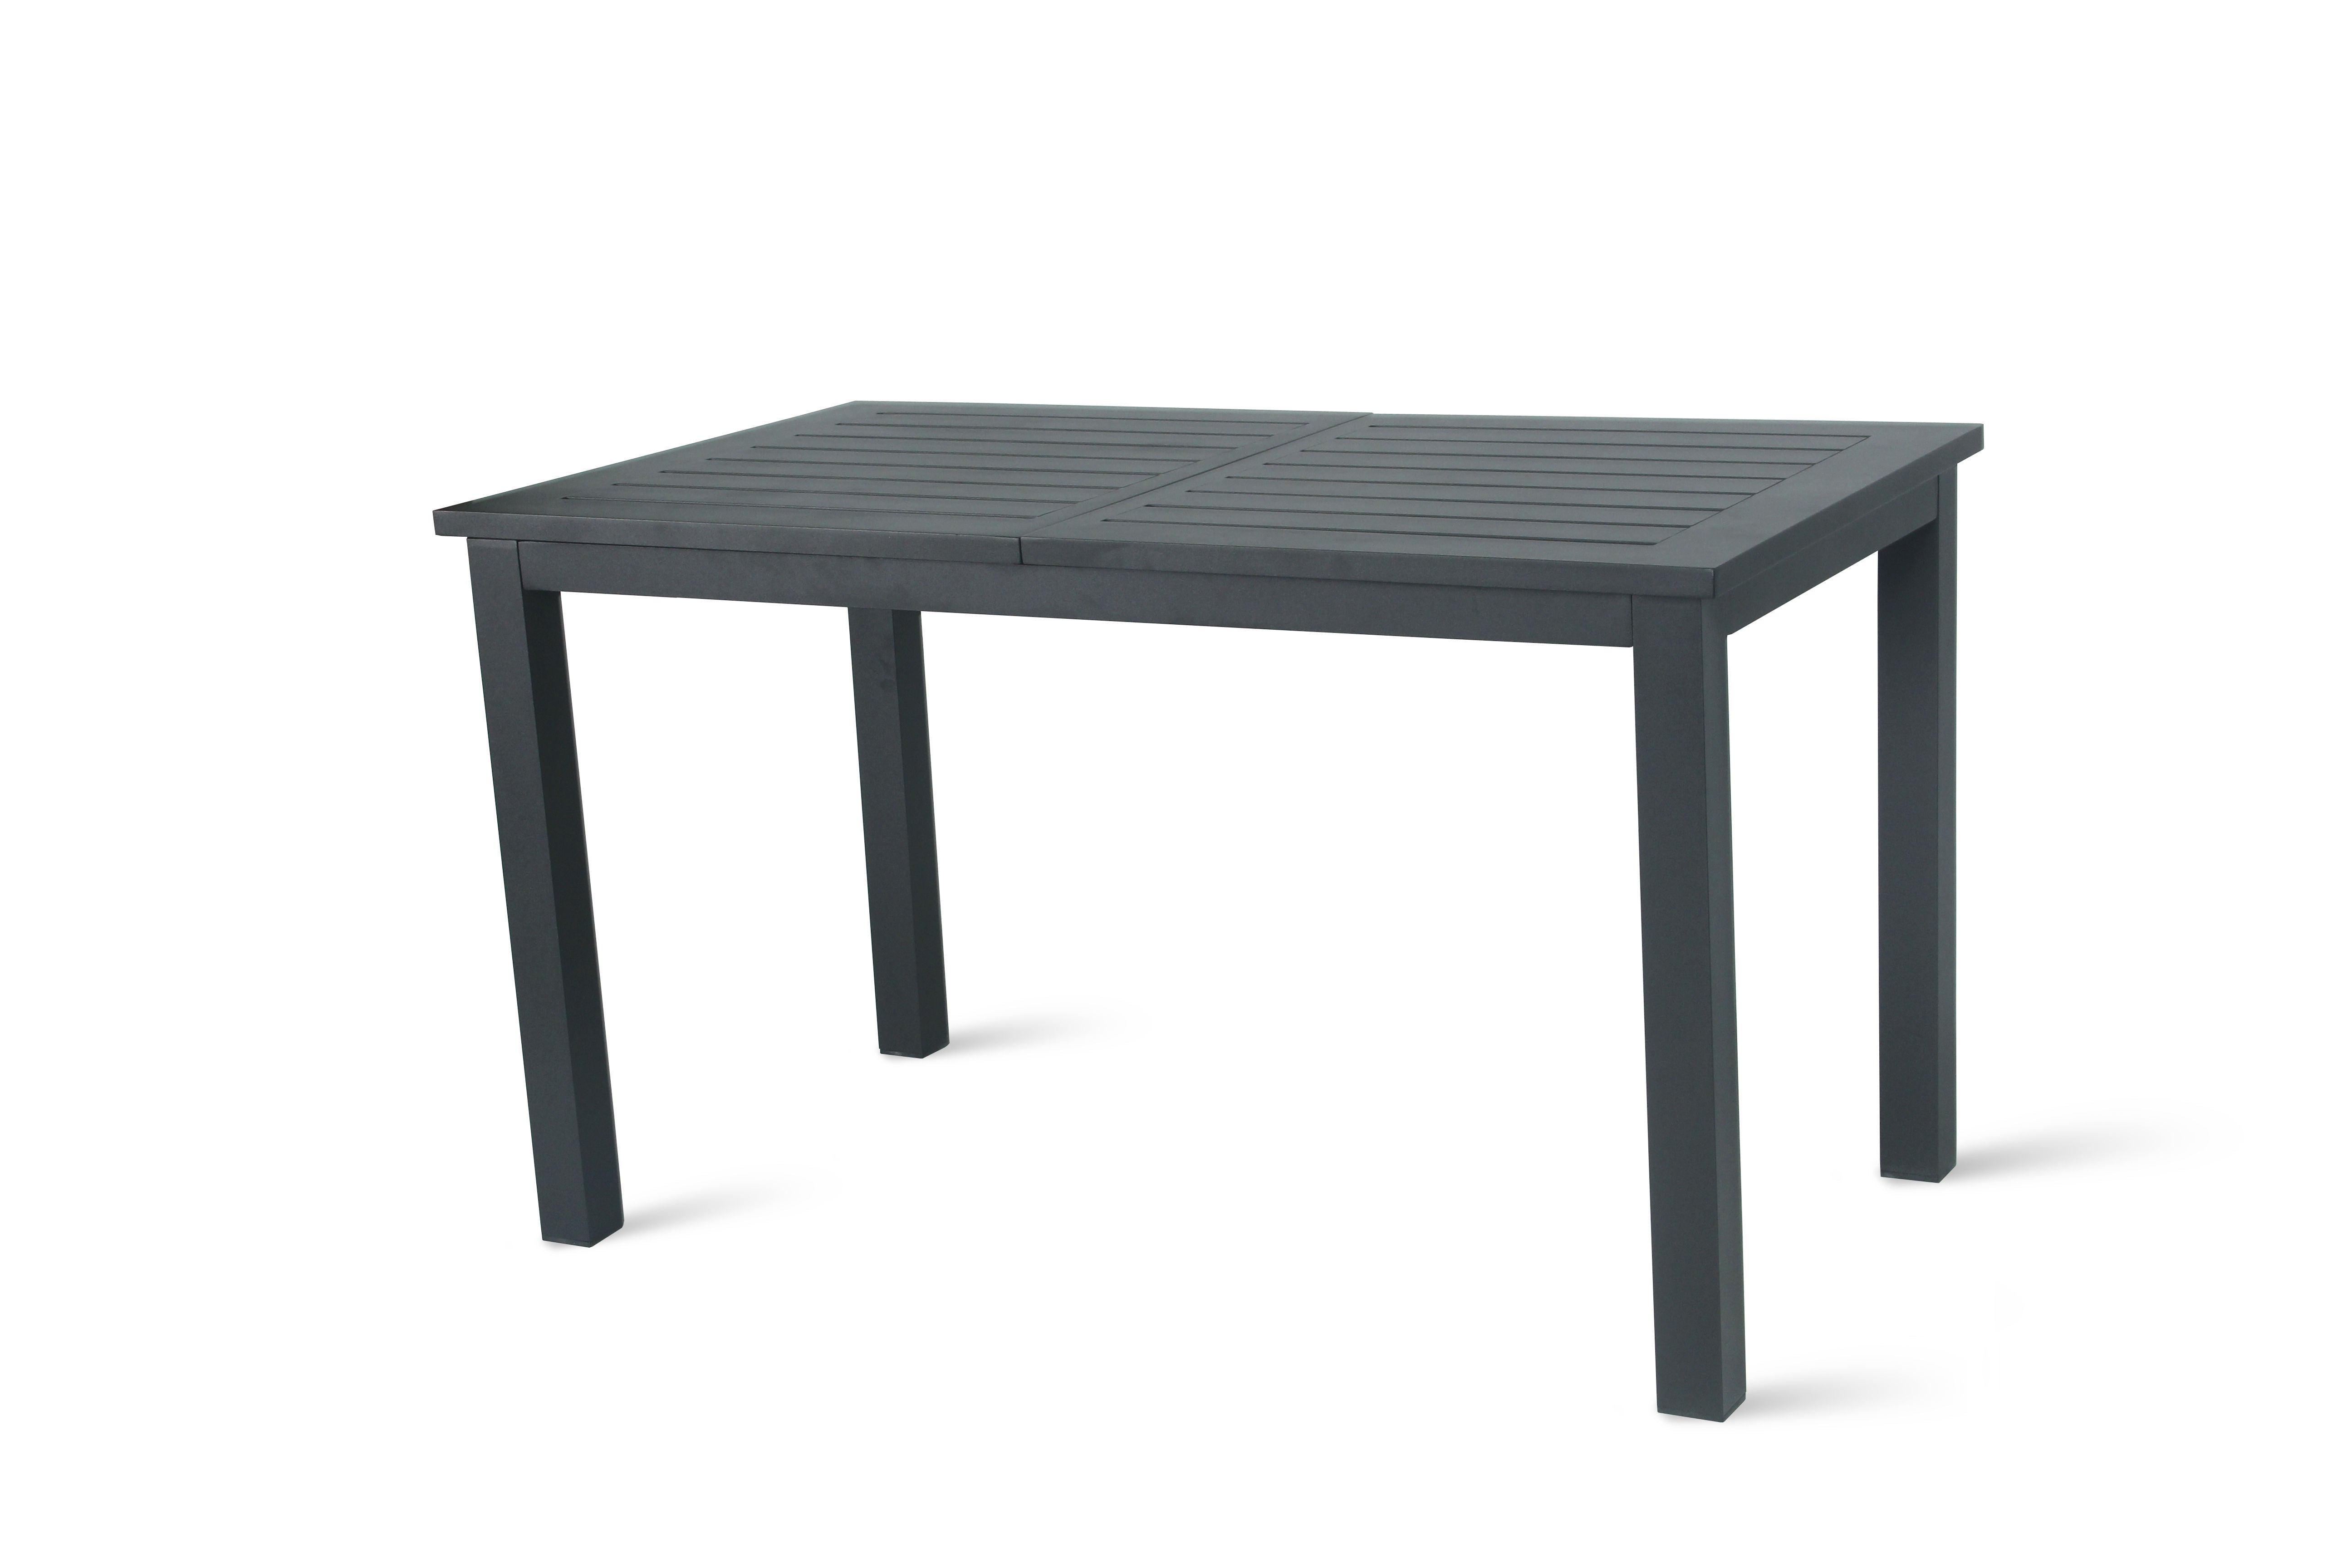 PatioZone Extendable Dining Table with Slated Tabletop (Butterfly Mechanism) Aluminum Frame (MOSS-T206C) - Matte Charcoal